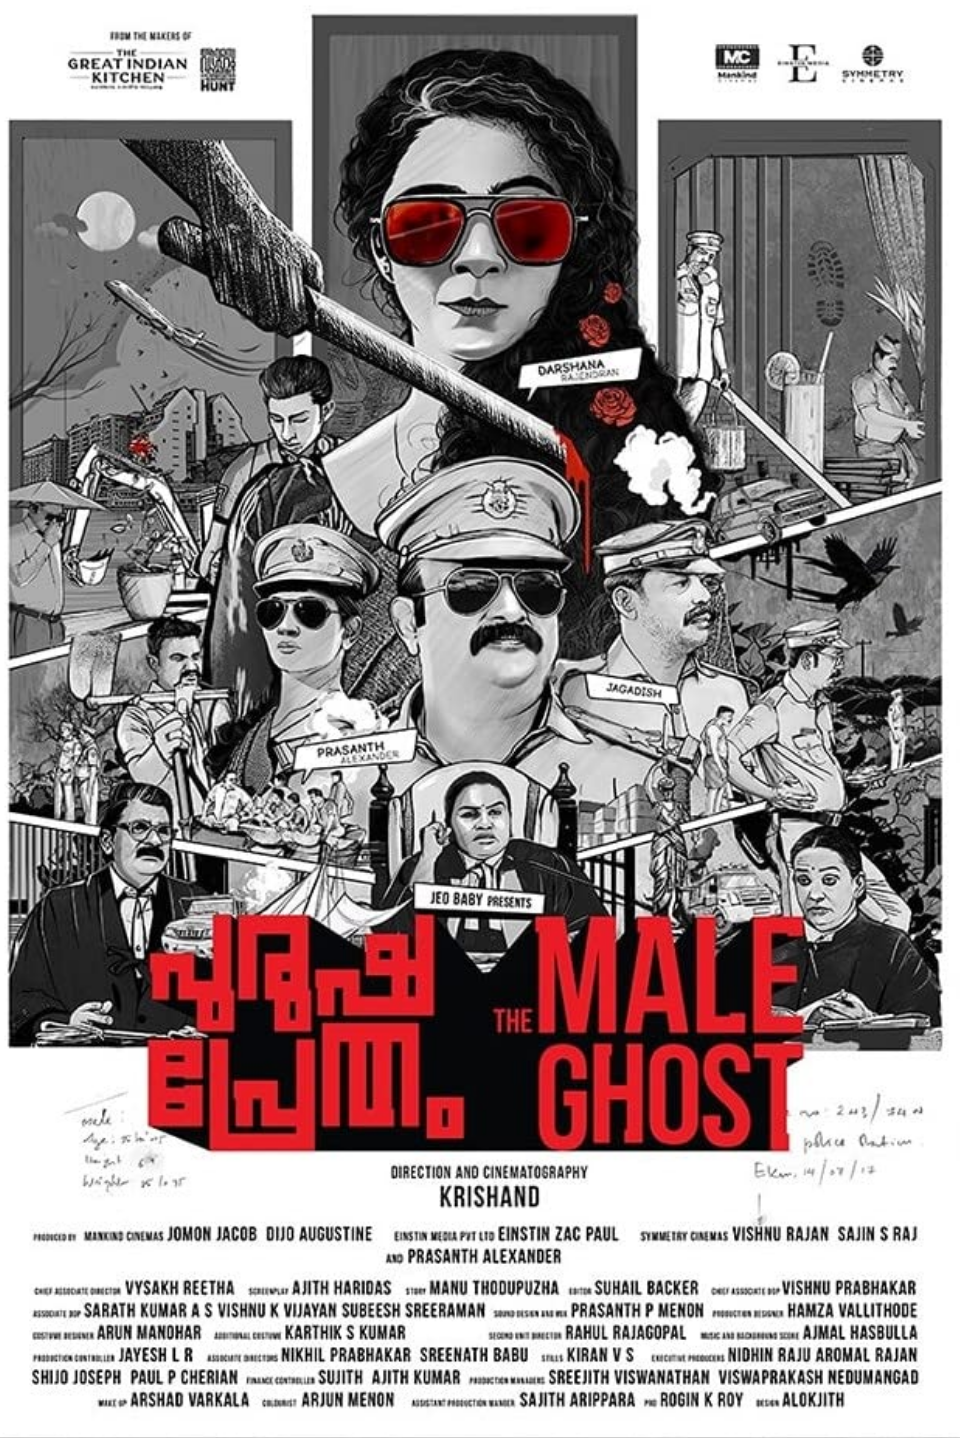 Image of a film poster